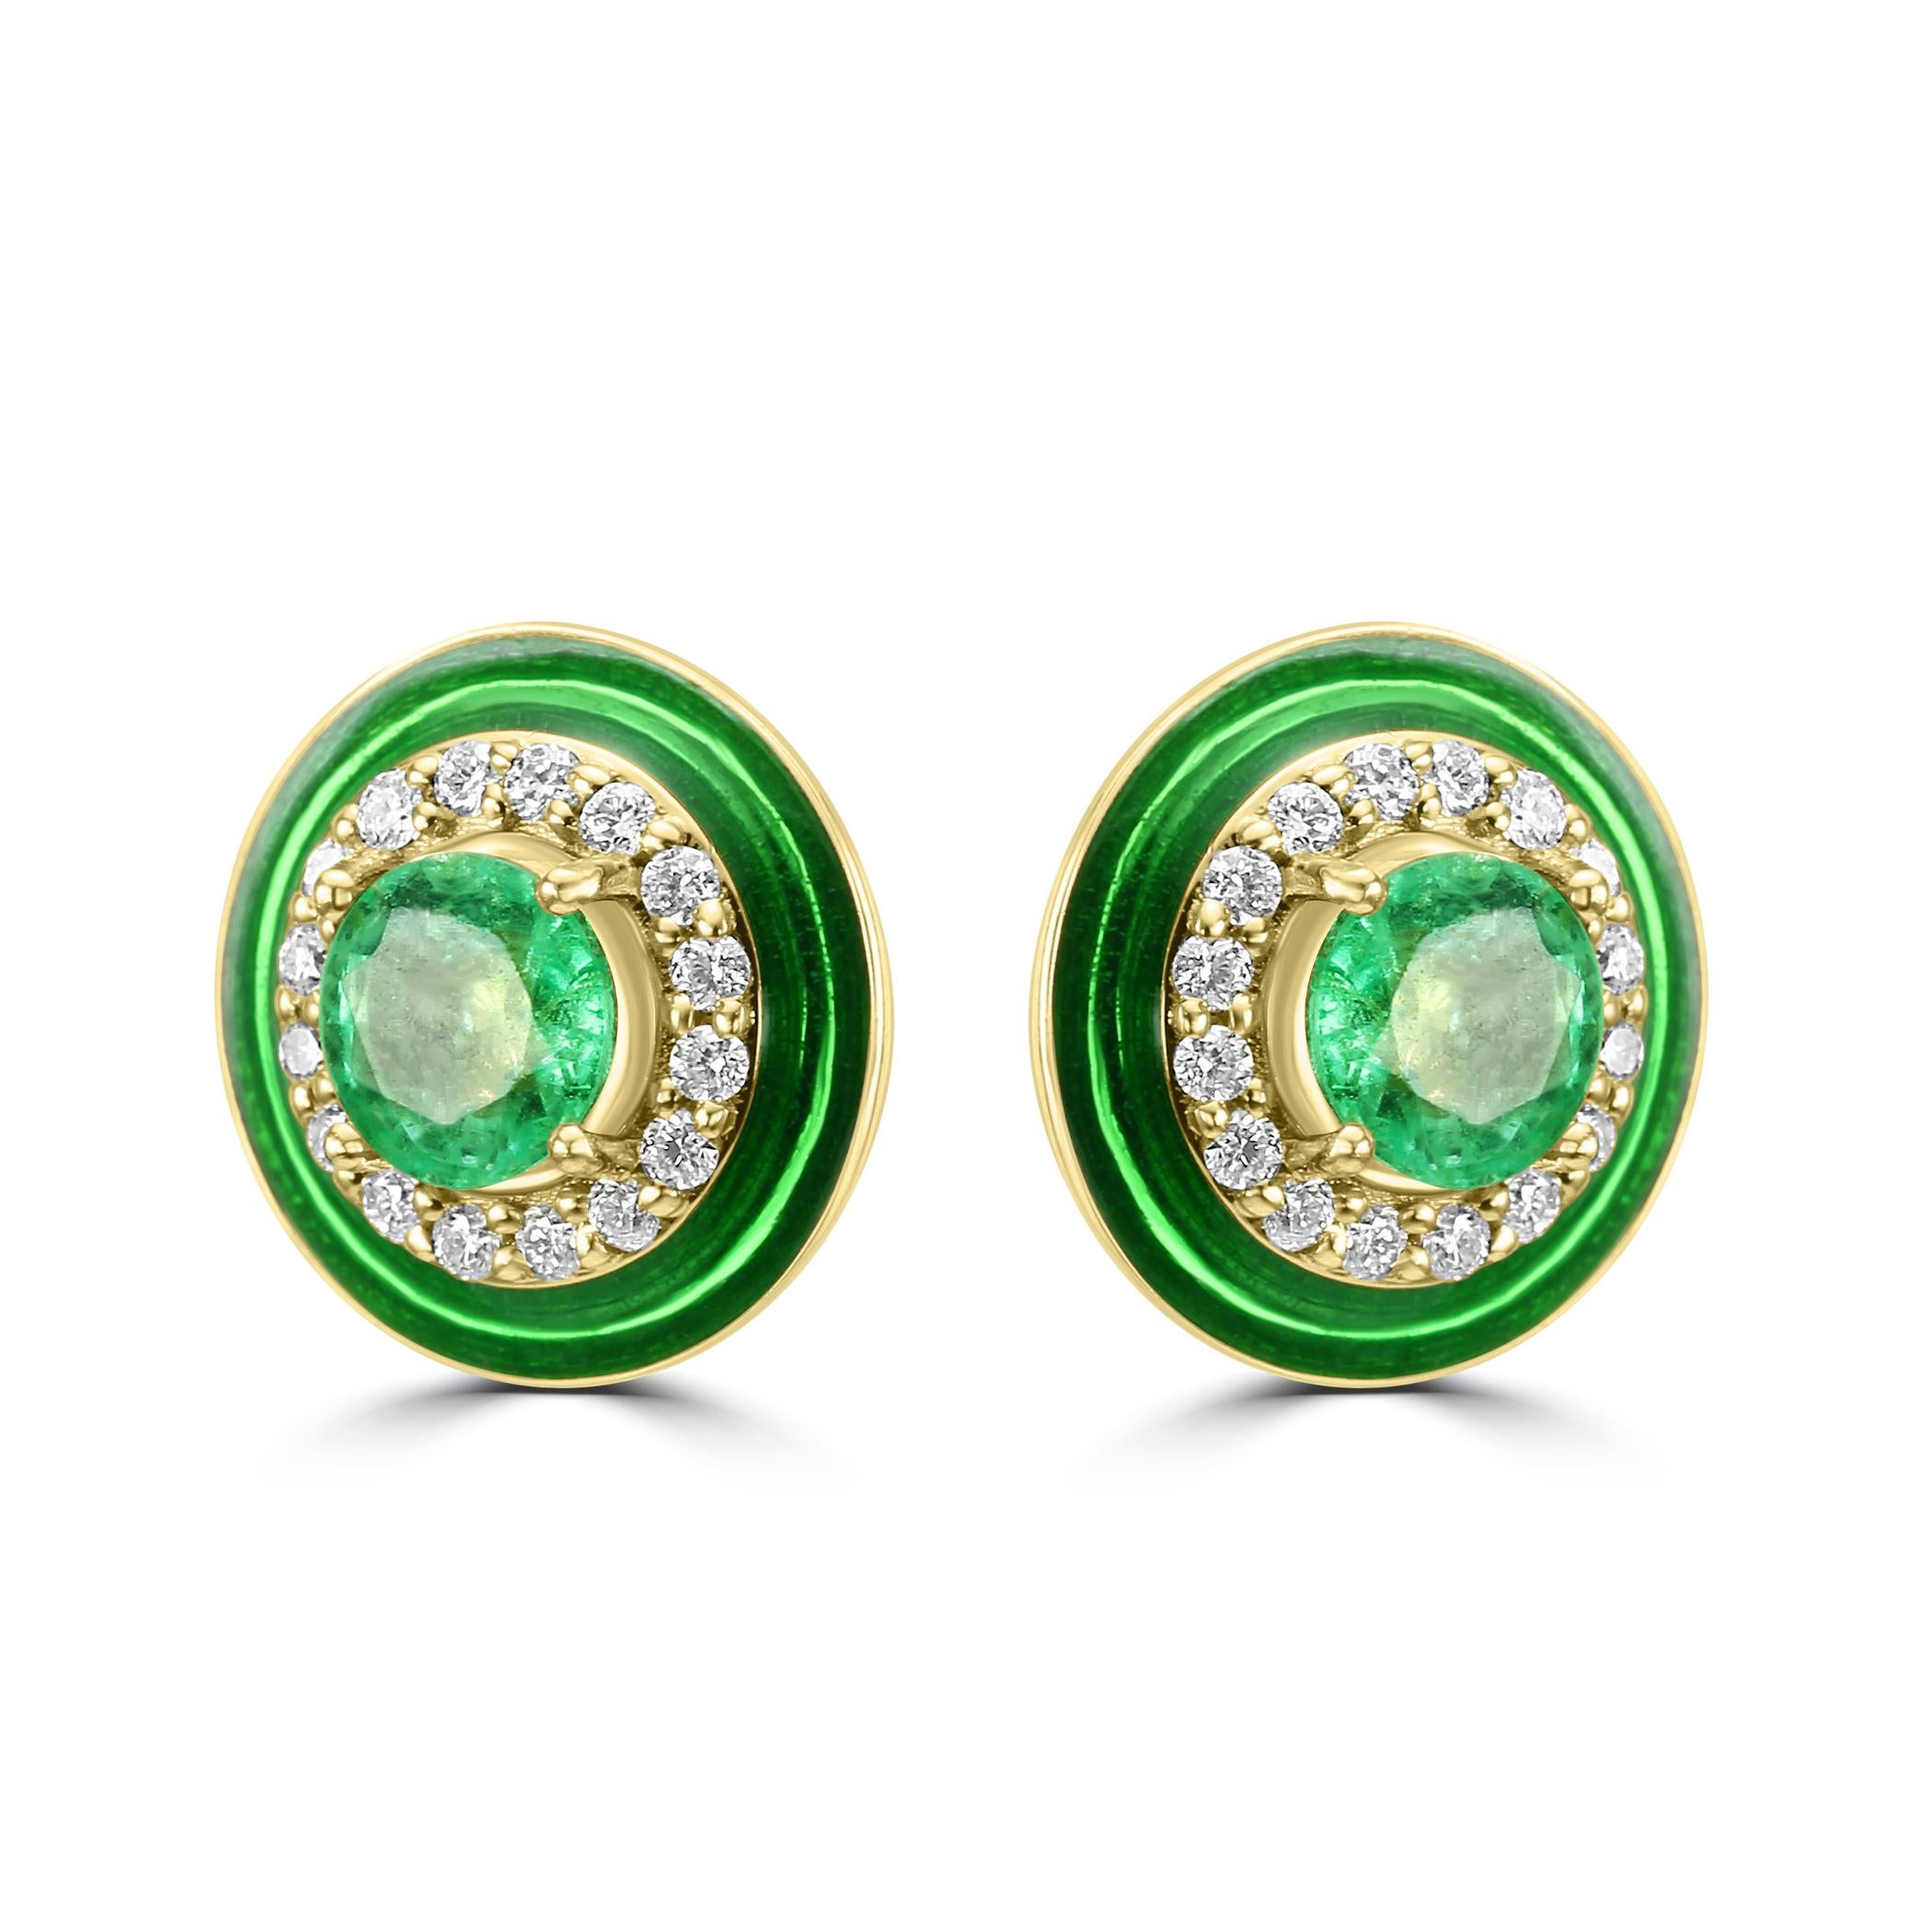 These earrings features a mesmerizing Emerald round center, delicately set and weighing a total of 0.32 carats. The rich green hue of the emerald adds a touch of luxury and timelessness to the design, making it a standout piece in your